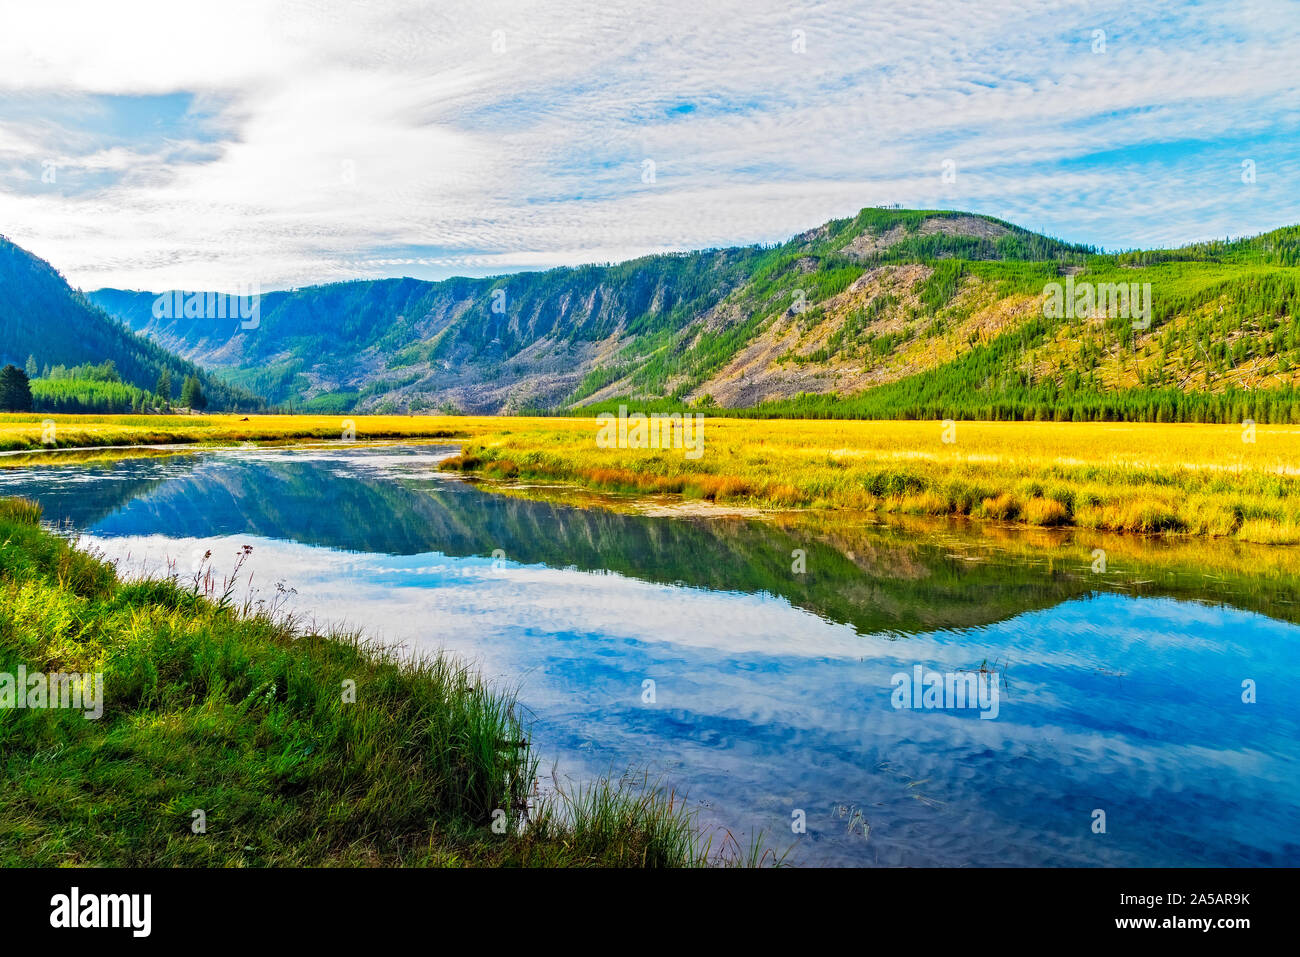 River running through valley of golden yellow grass fields with forest covered mountains under cloudy skies with bright blue. Reflecting water. Stock Photo